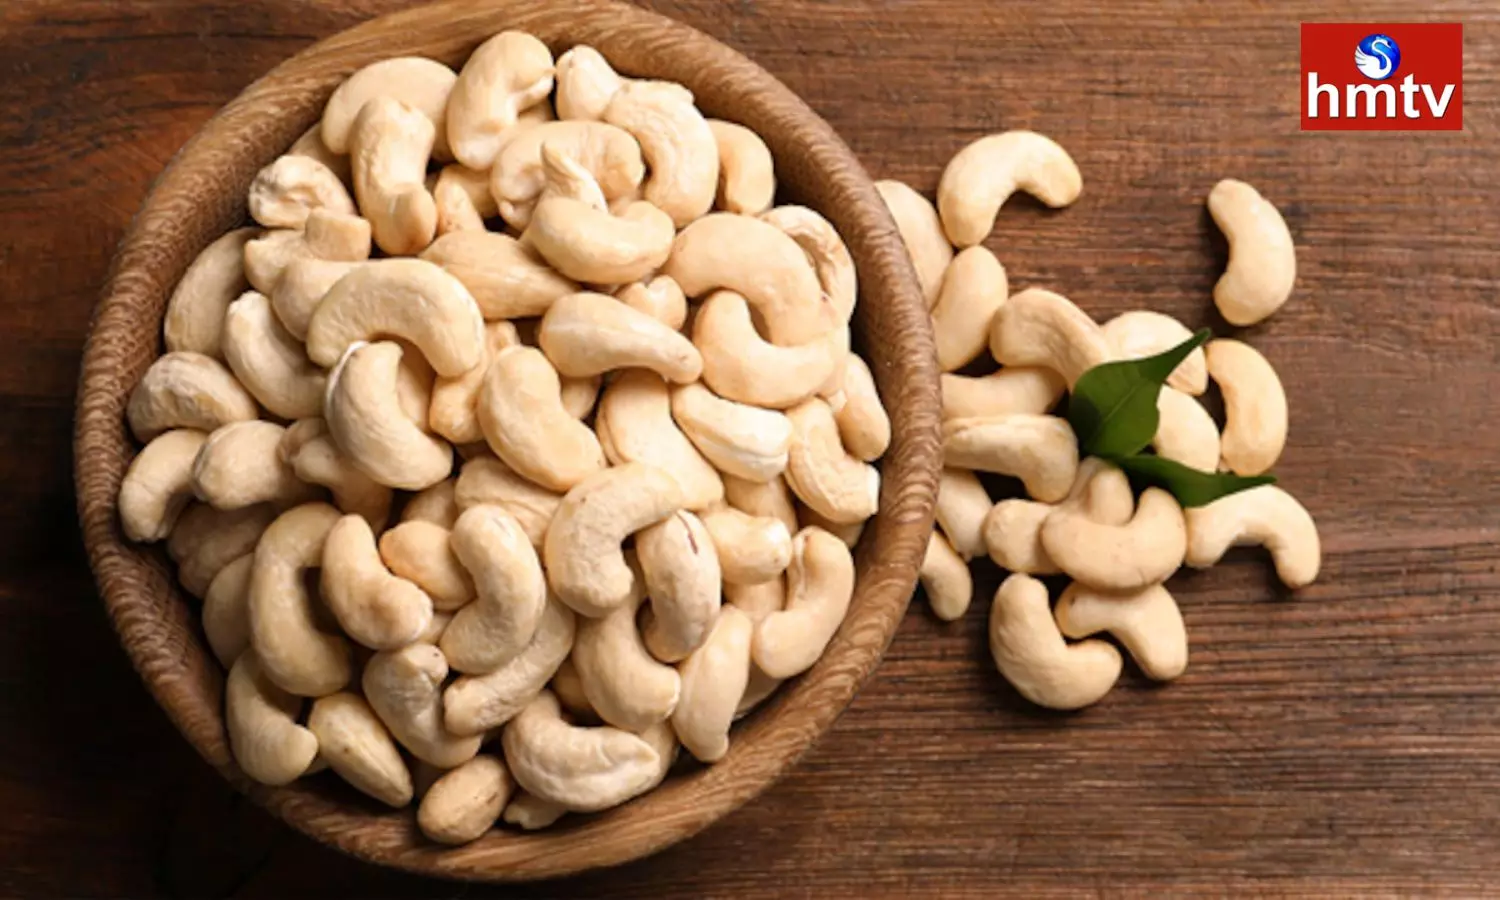 Eating cashews during winters boosts immunity body gets surprising benefits